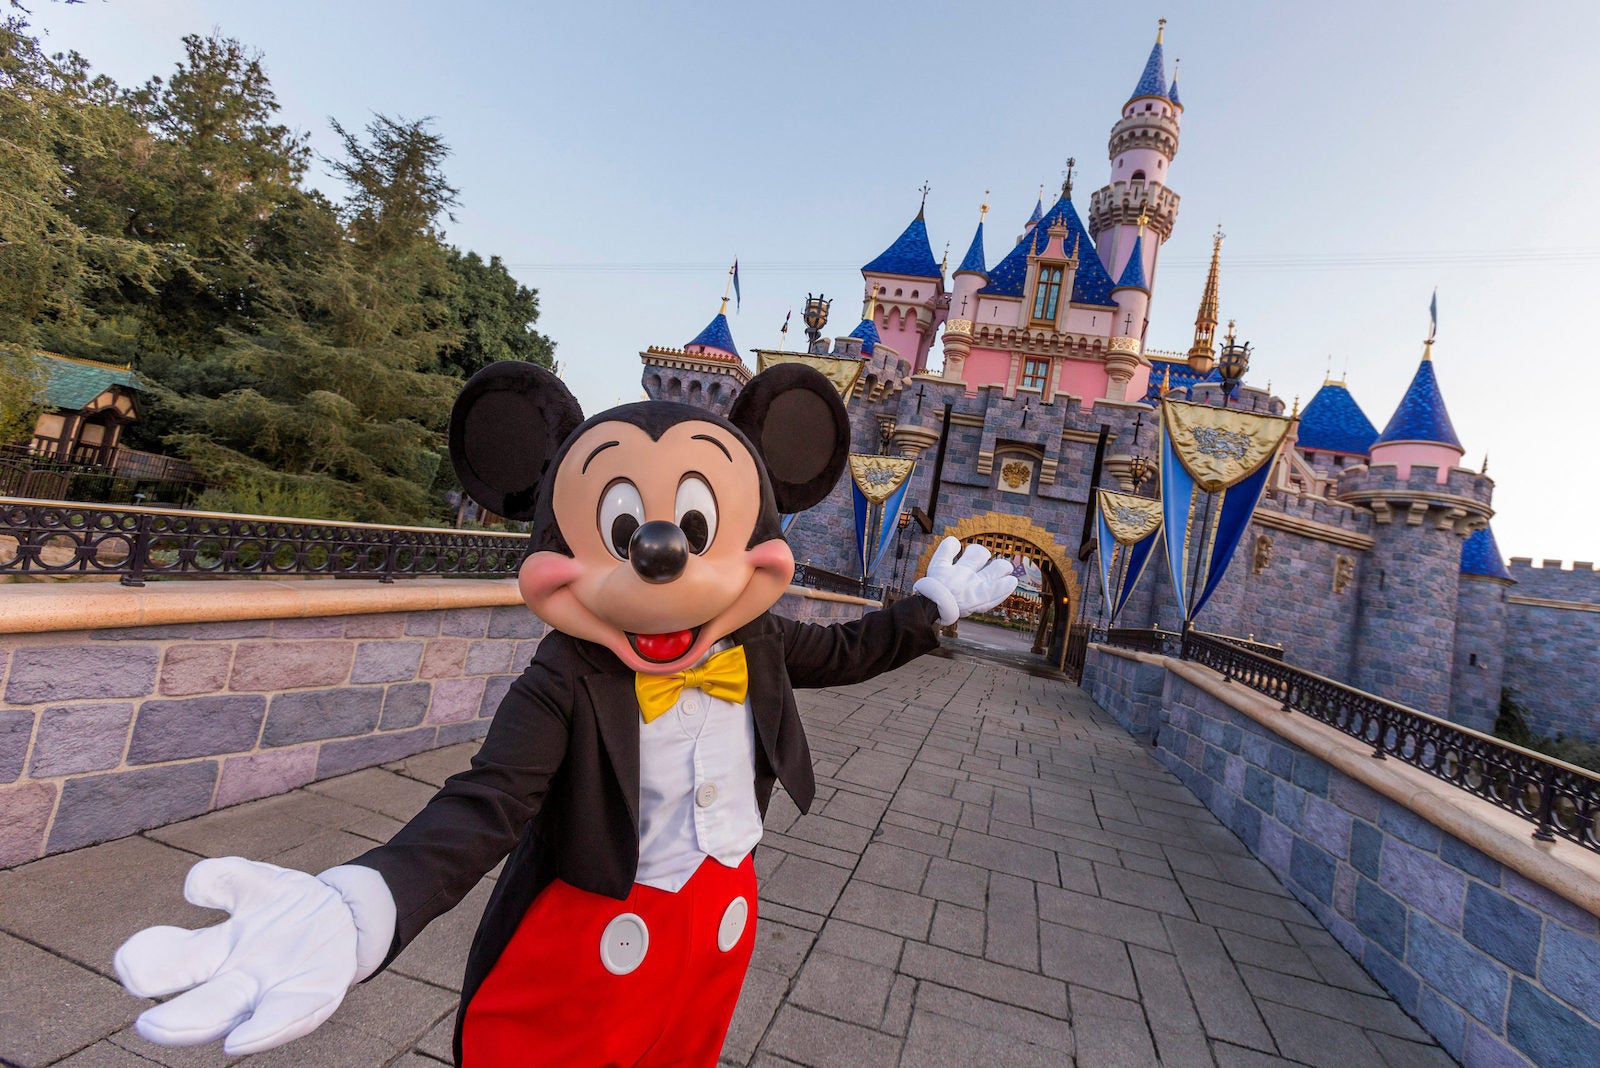 A Complete Visitor's Guide to Disneyland